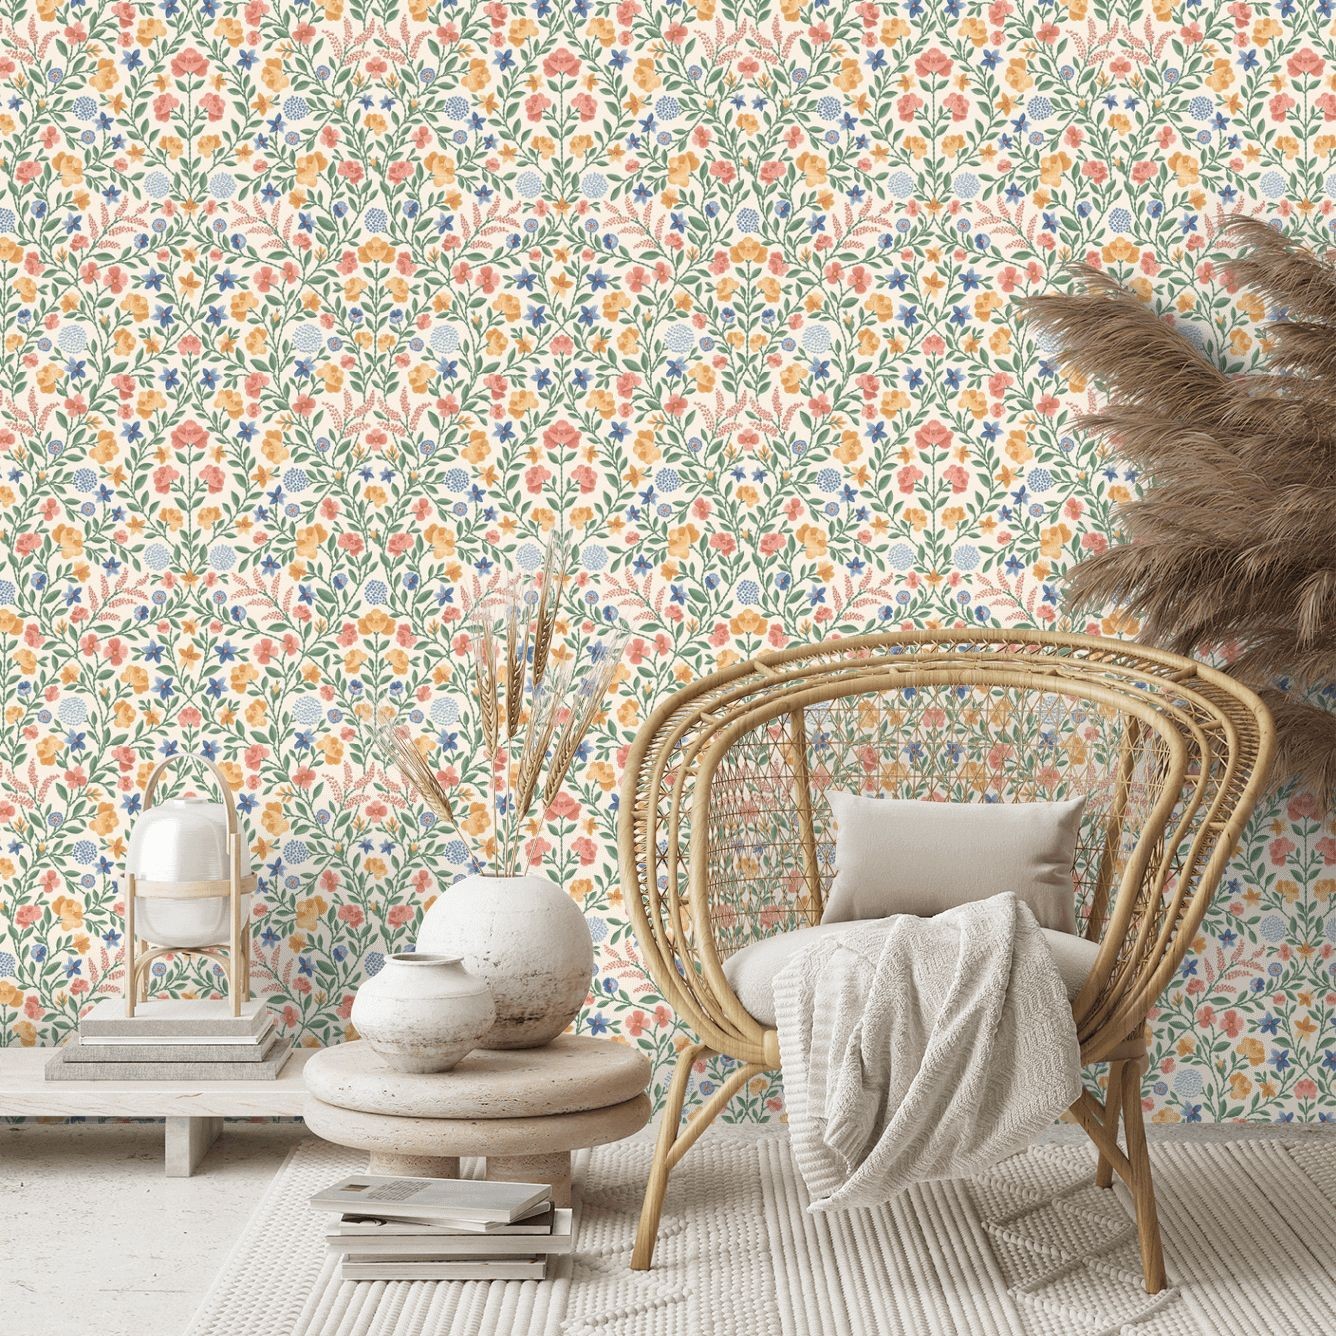 Court Embroidery Wallpaper - Coral / Marigold / Hyacinth / Parchment - By  Cole and Son - 118/13029